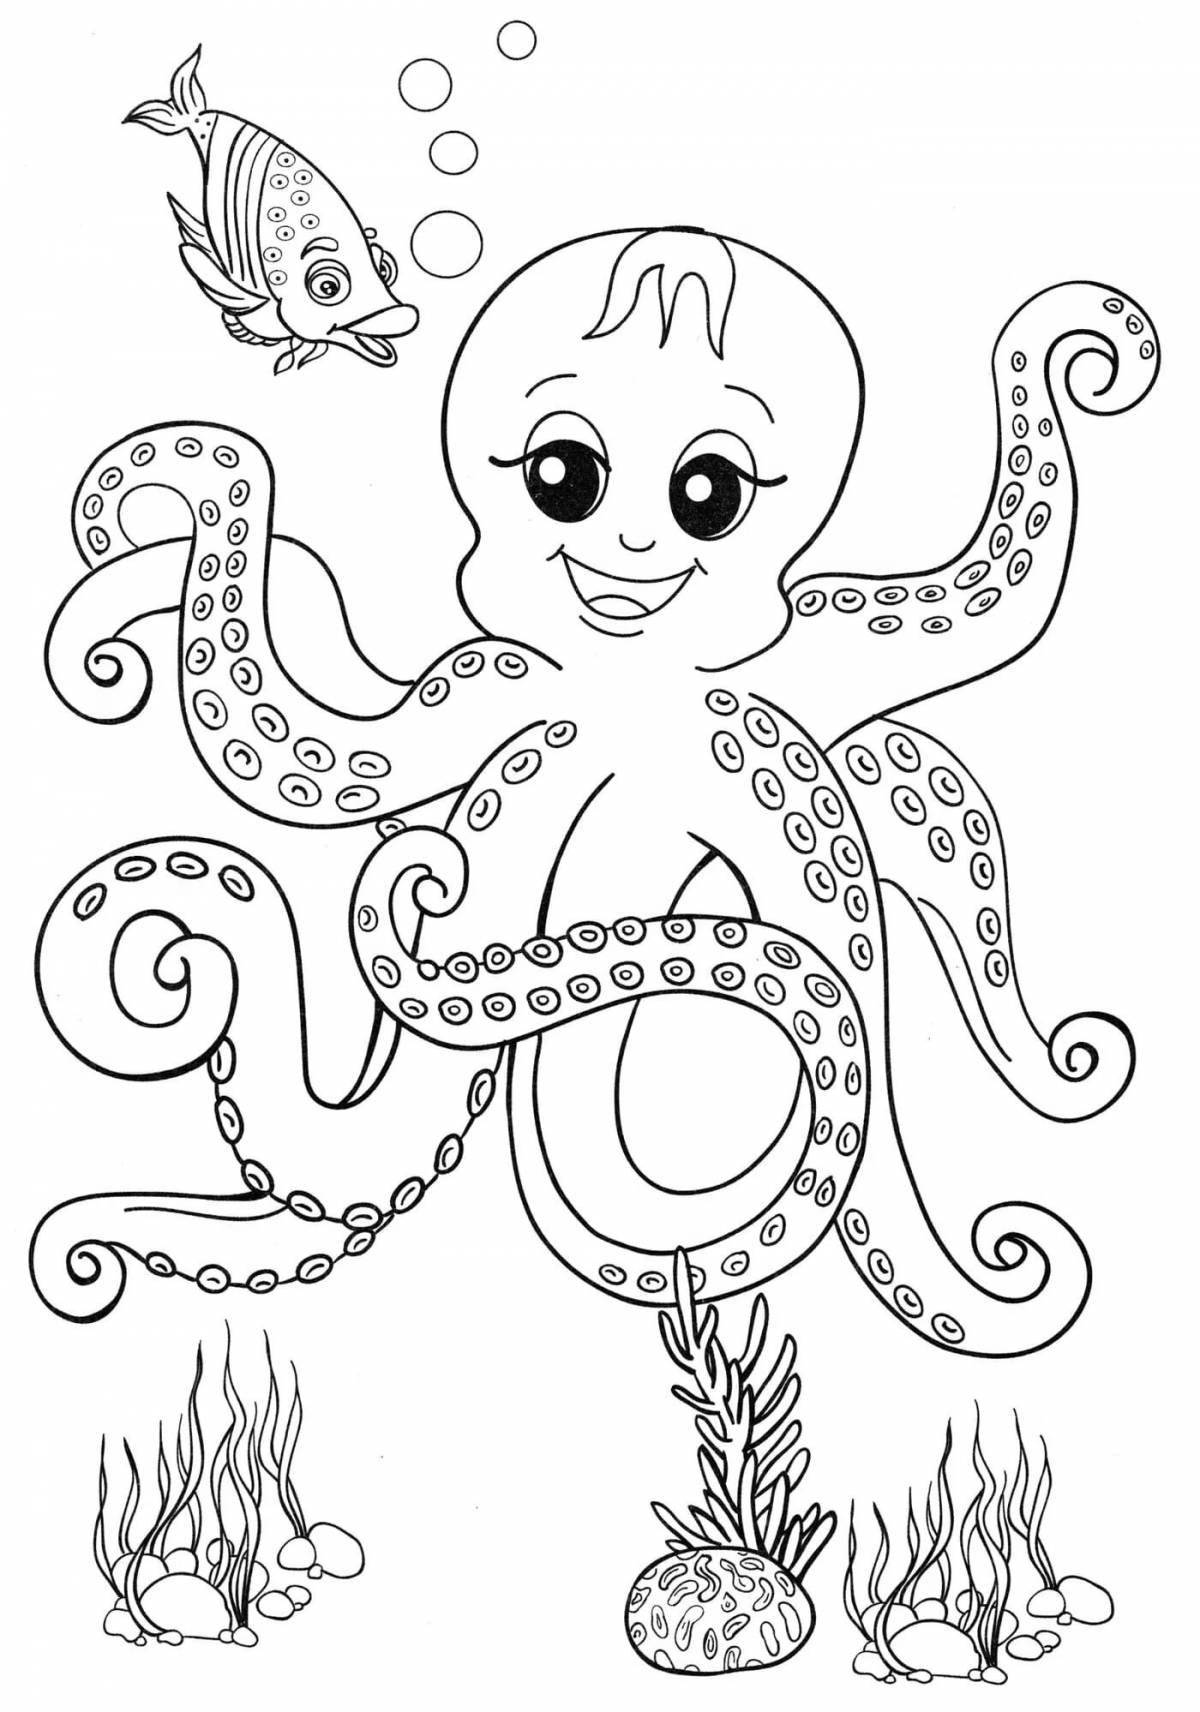 A striking octopus coloring page